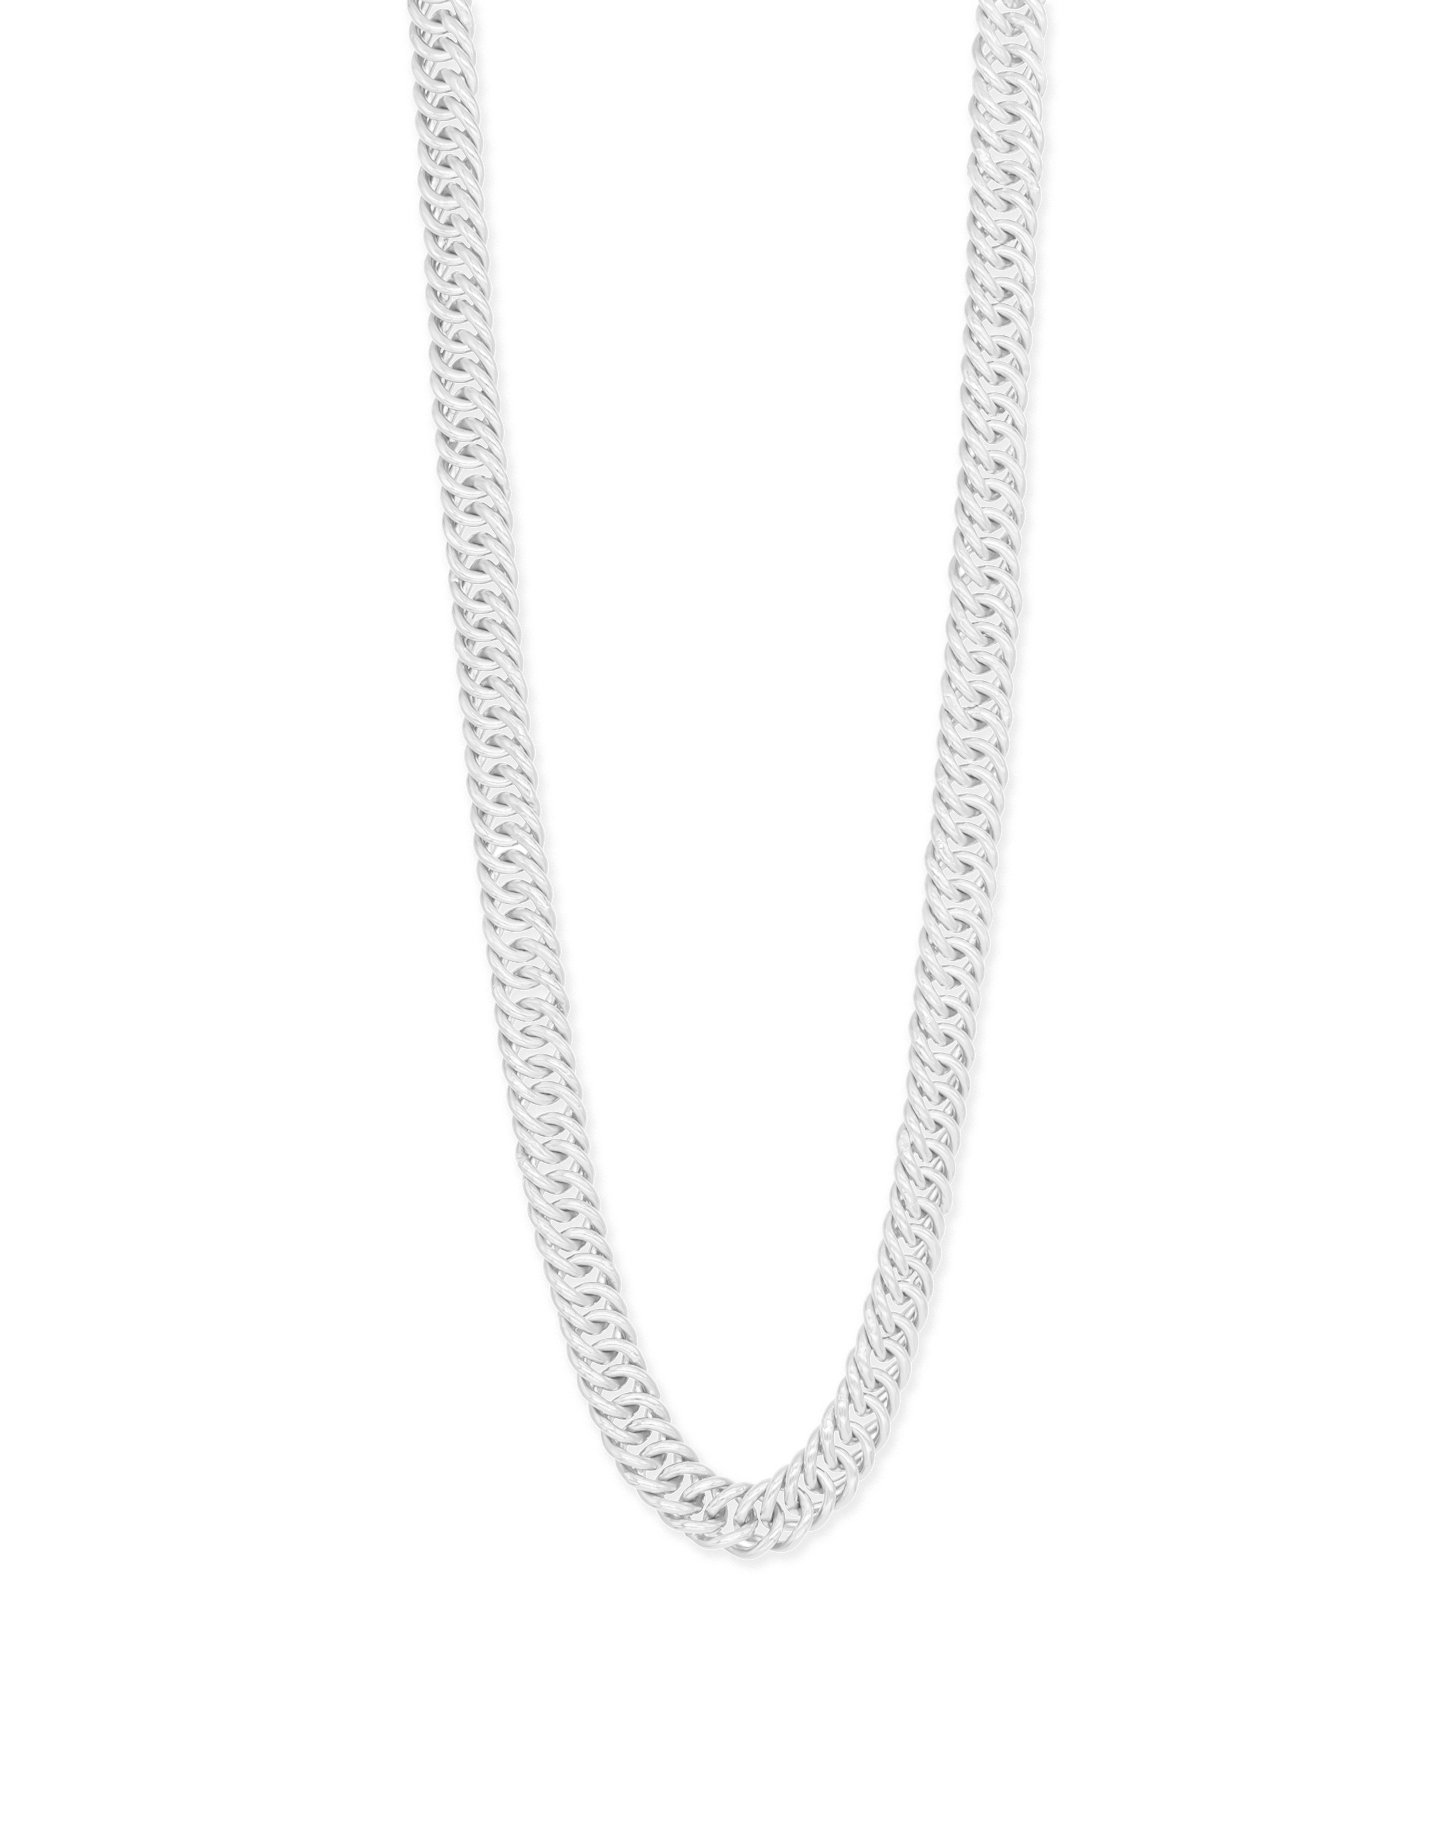 FOXTAIL CHAIN NECKLACE IN SILVER